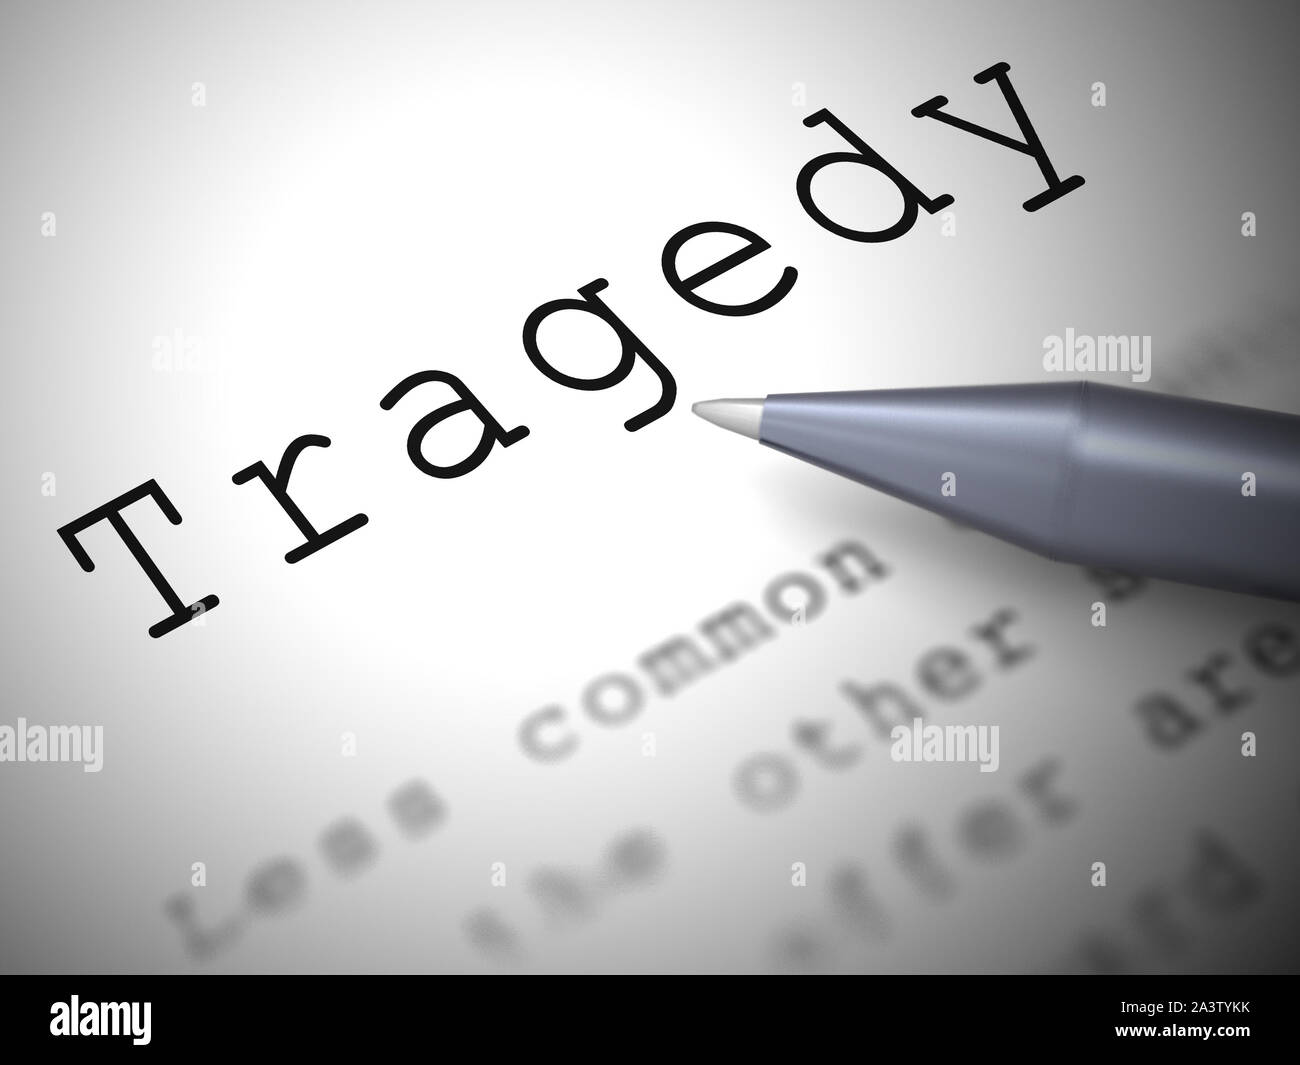 Tragedy concept icon means disaster catastrophe and calamity. Unhappy due to drama and depression - 3d illustration Stock Photo